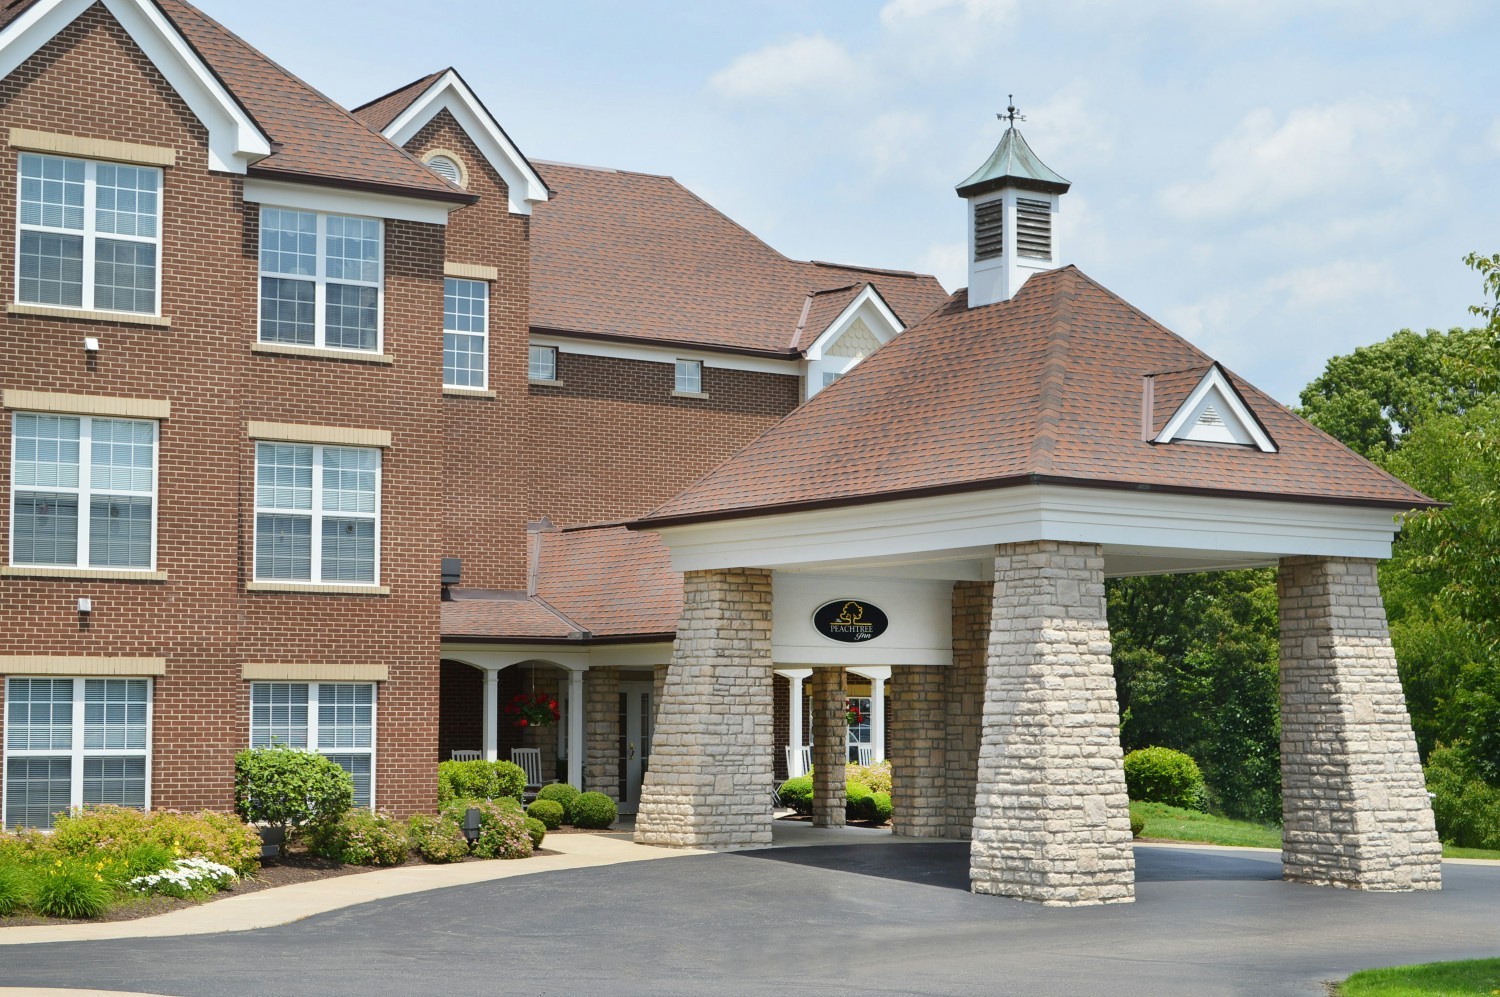 Peachtree Inn offers high-end amenities, restaurant-style dining, and private suites in an independent living setting. 